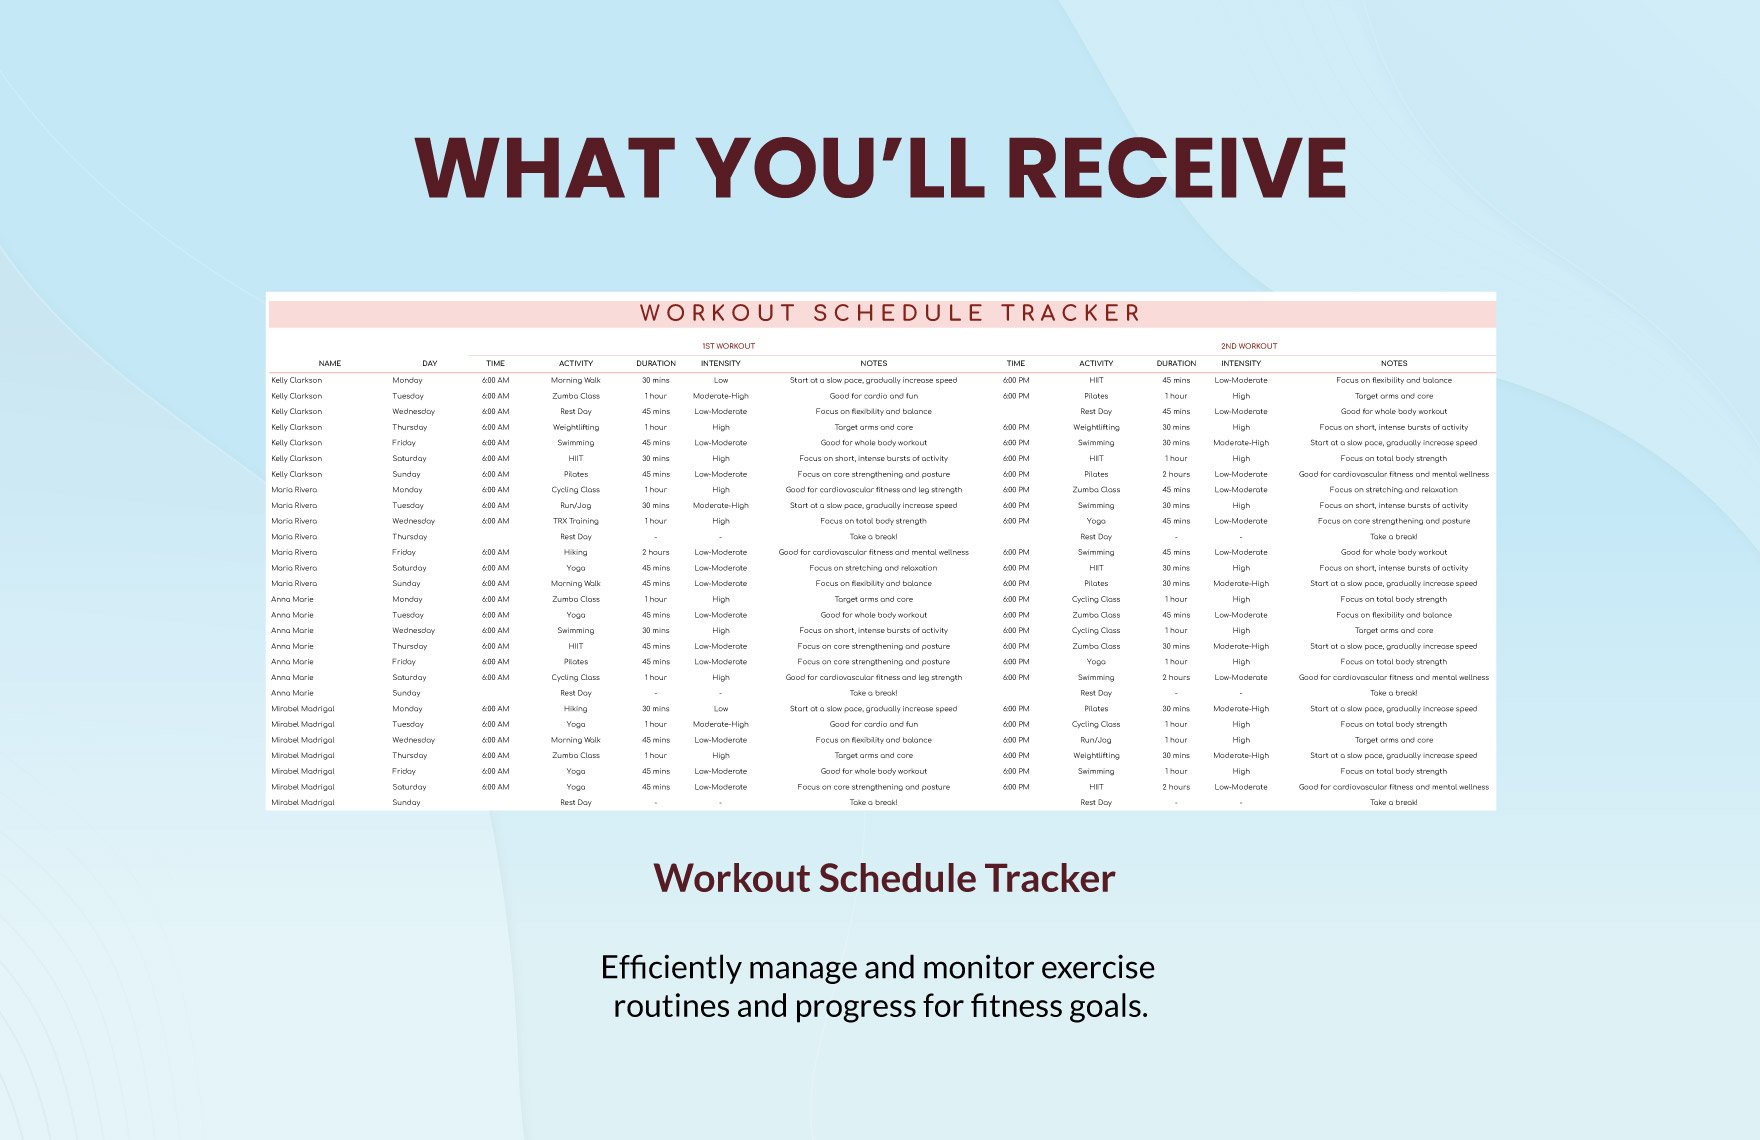 Workout Schedule Template